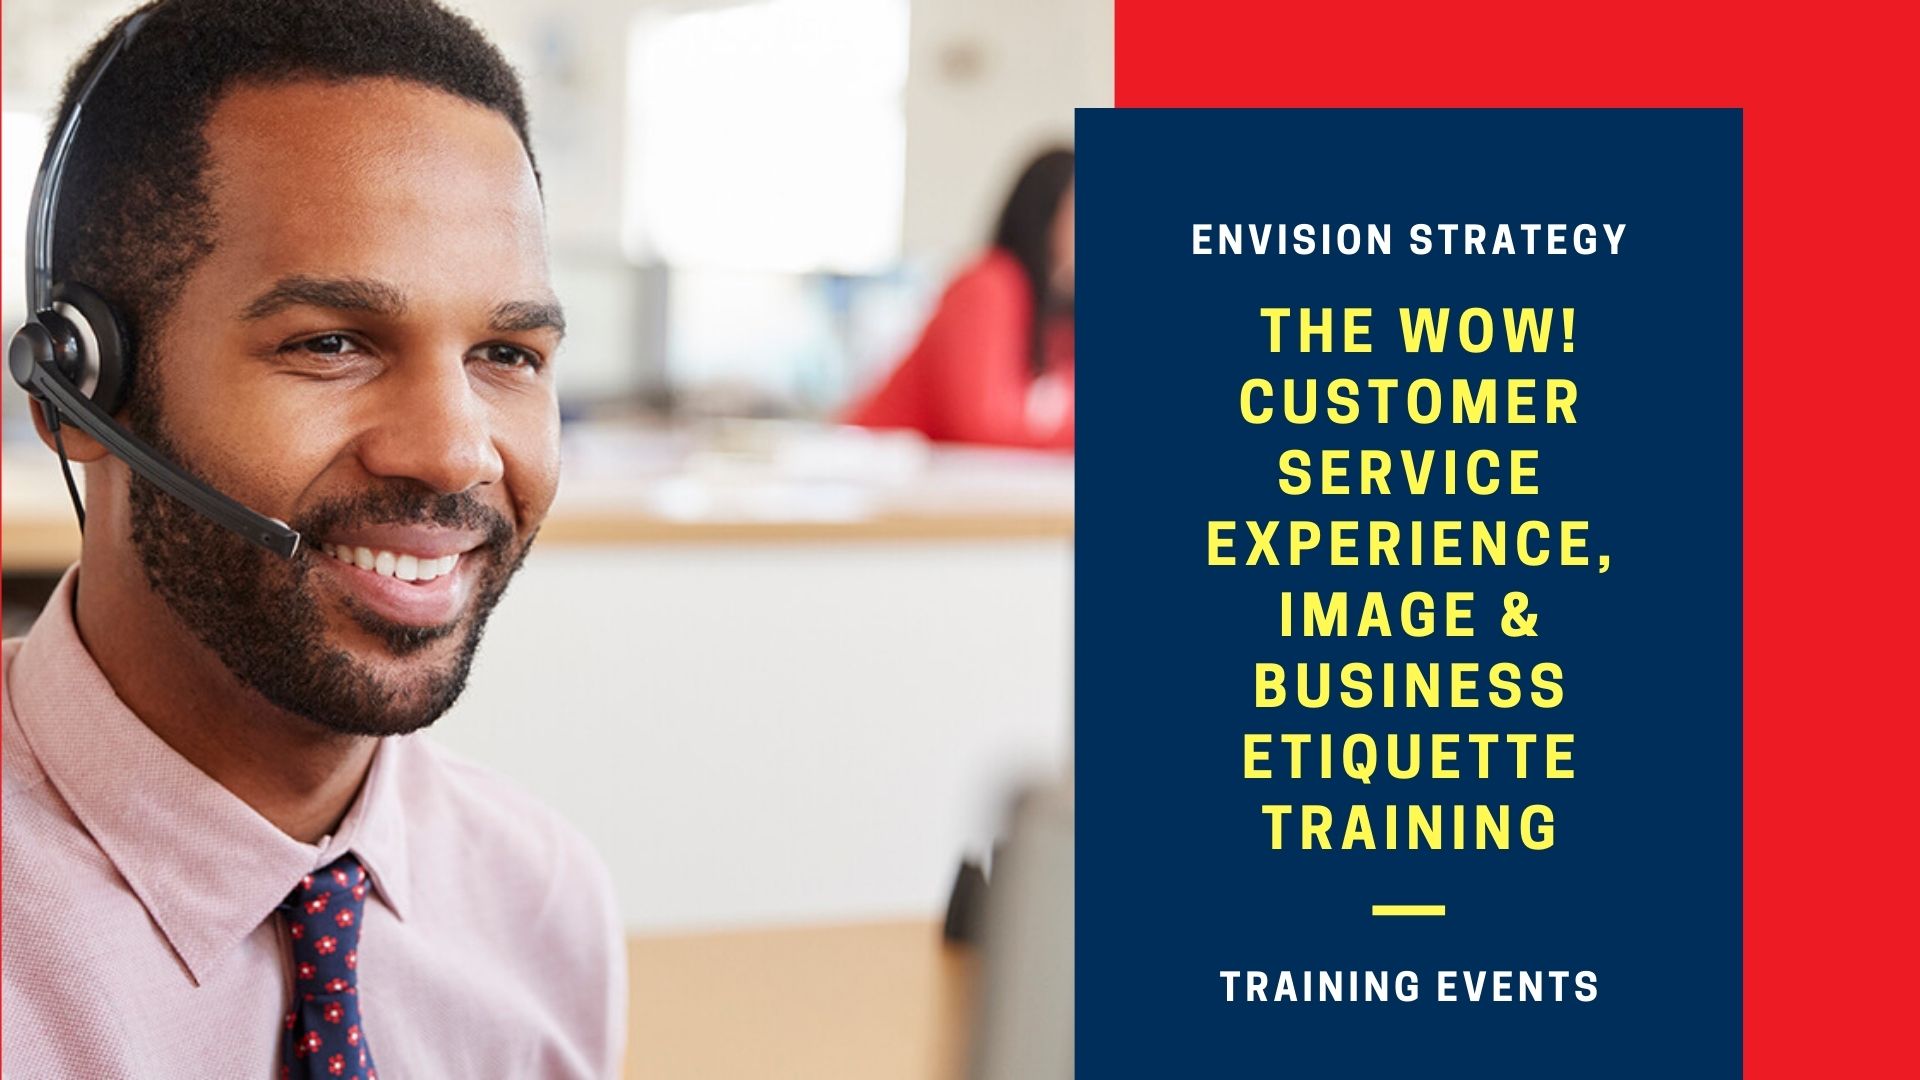 Customer Service Experience, Image & Business Etiquette Training